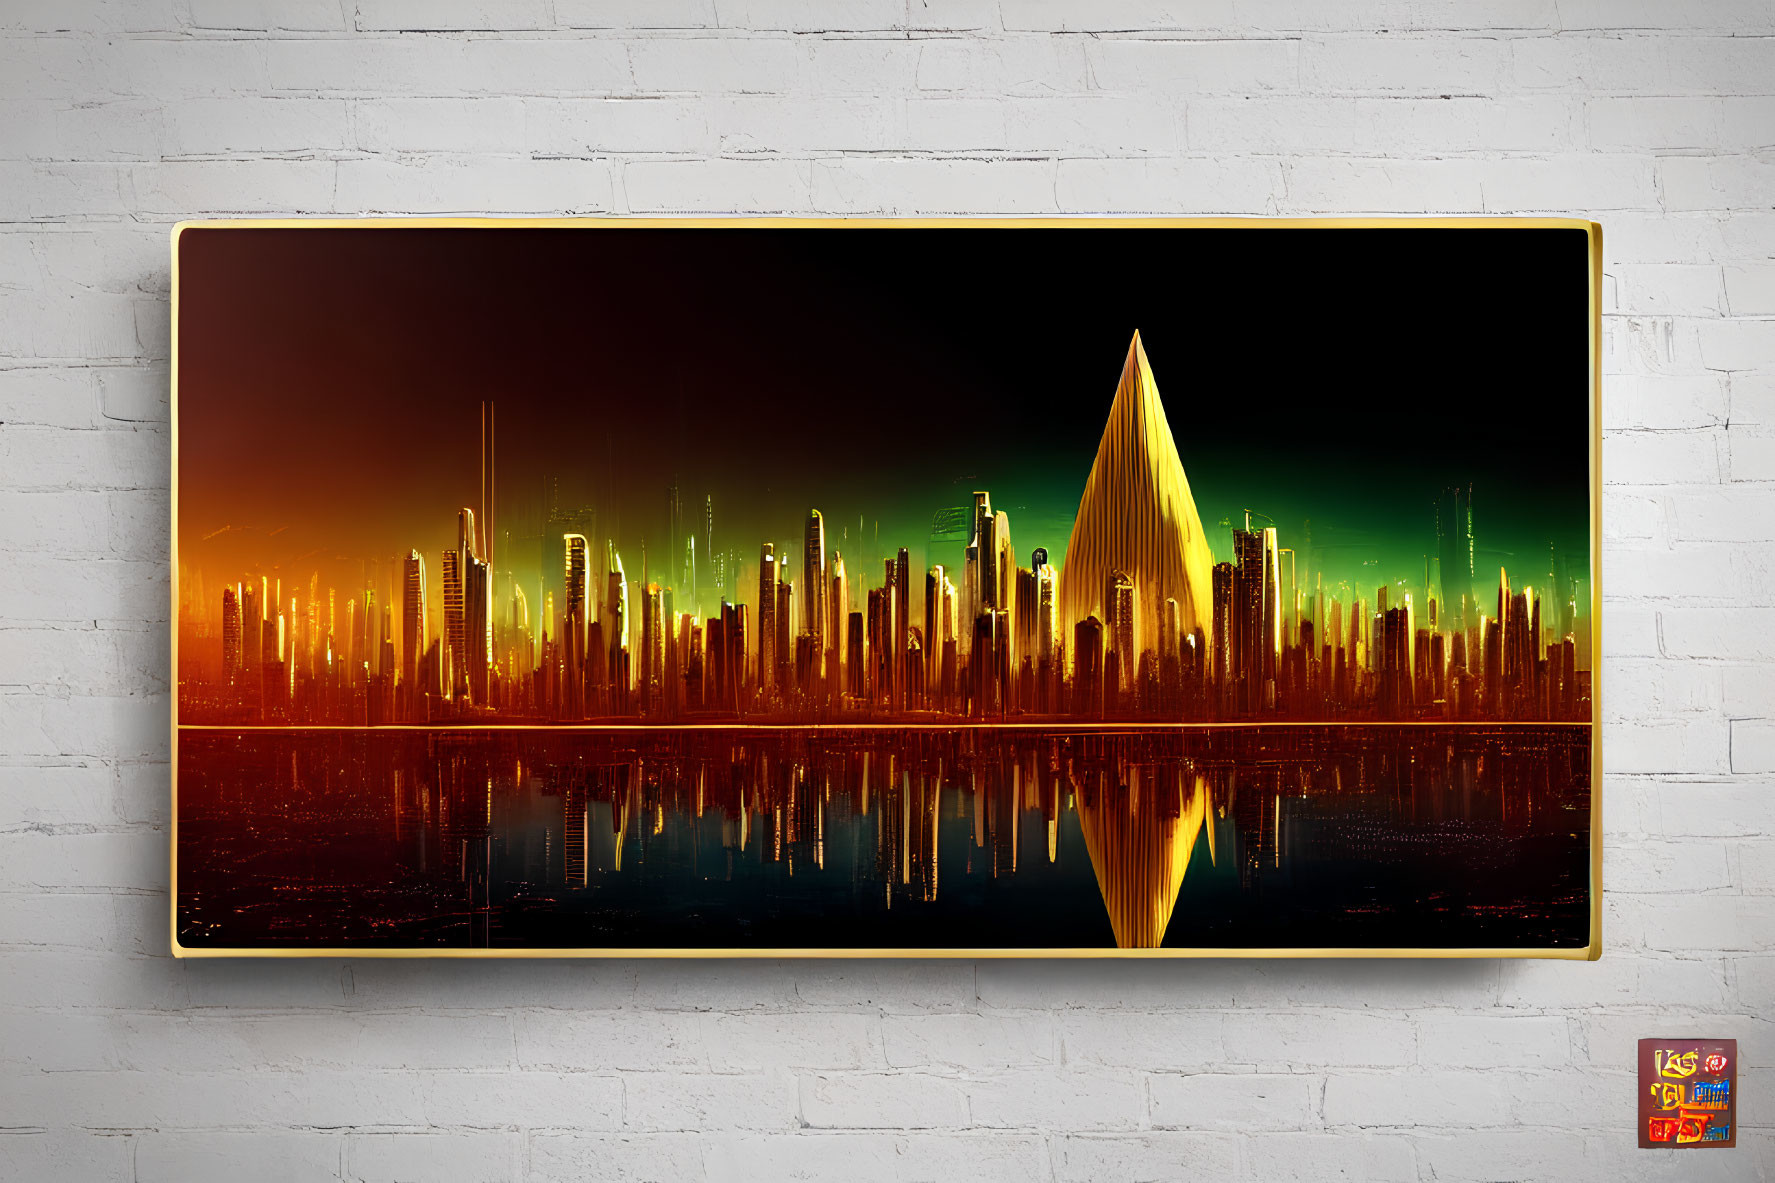 Futuristic cityscape with golden pyramid on canvas against white brick wall